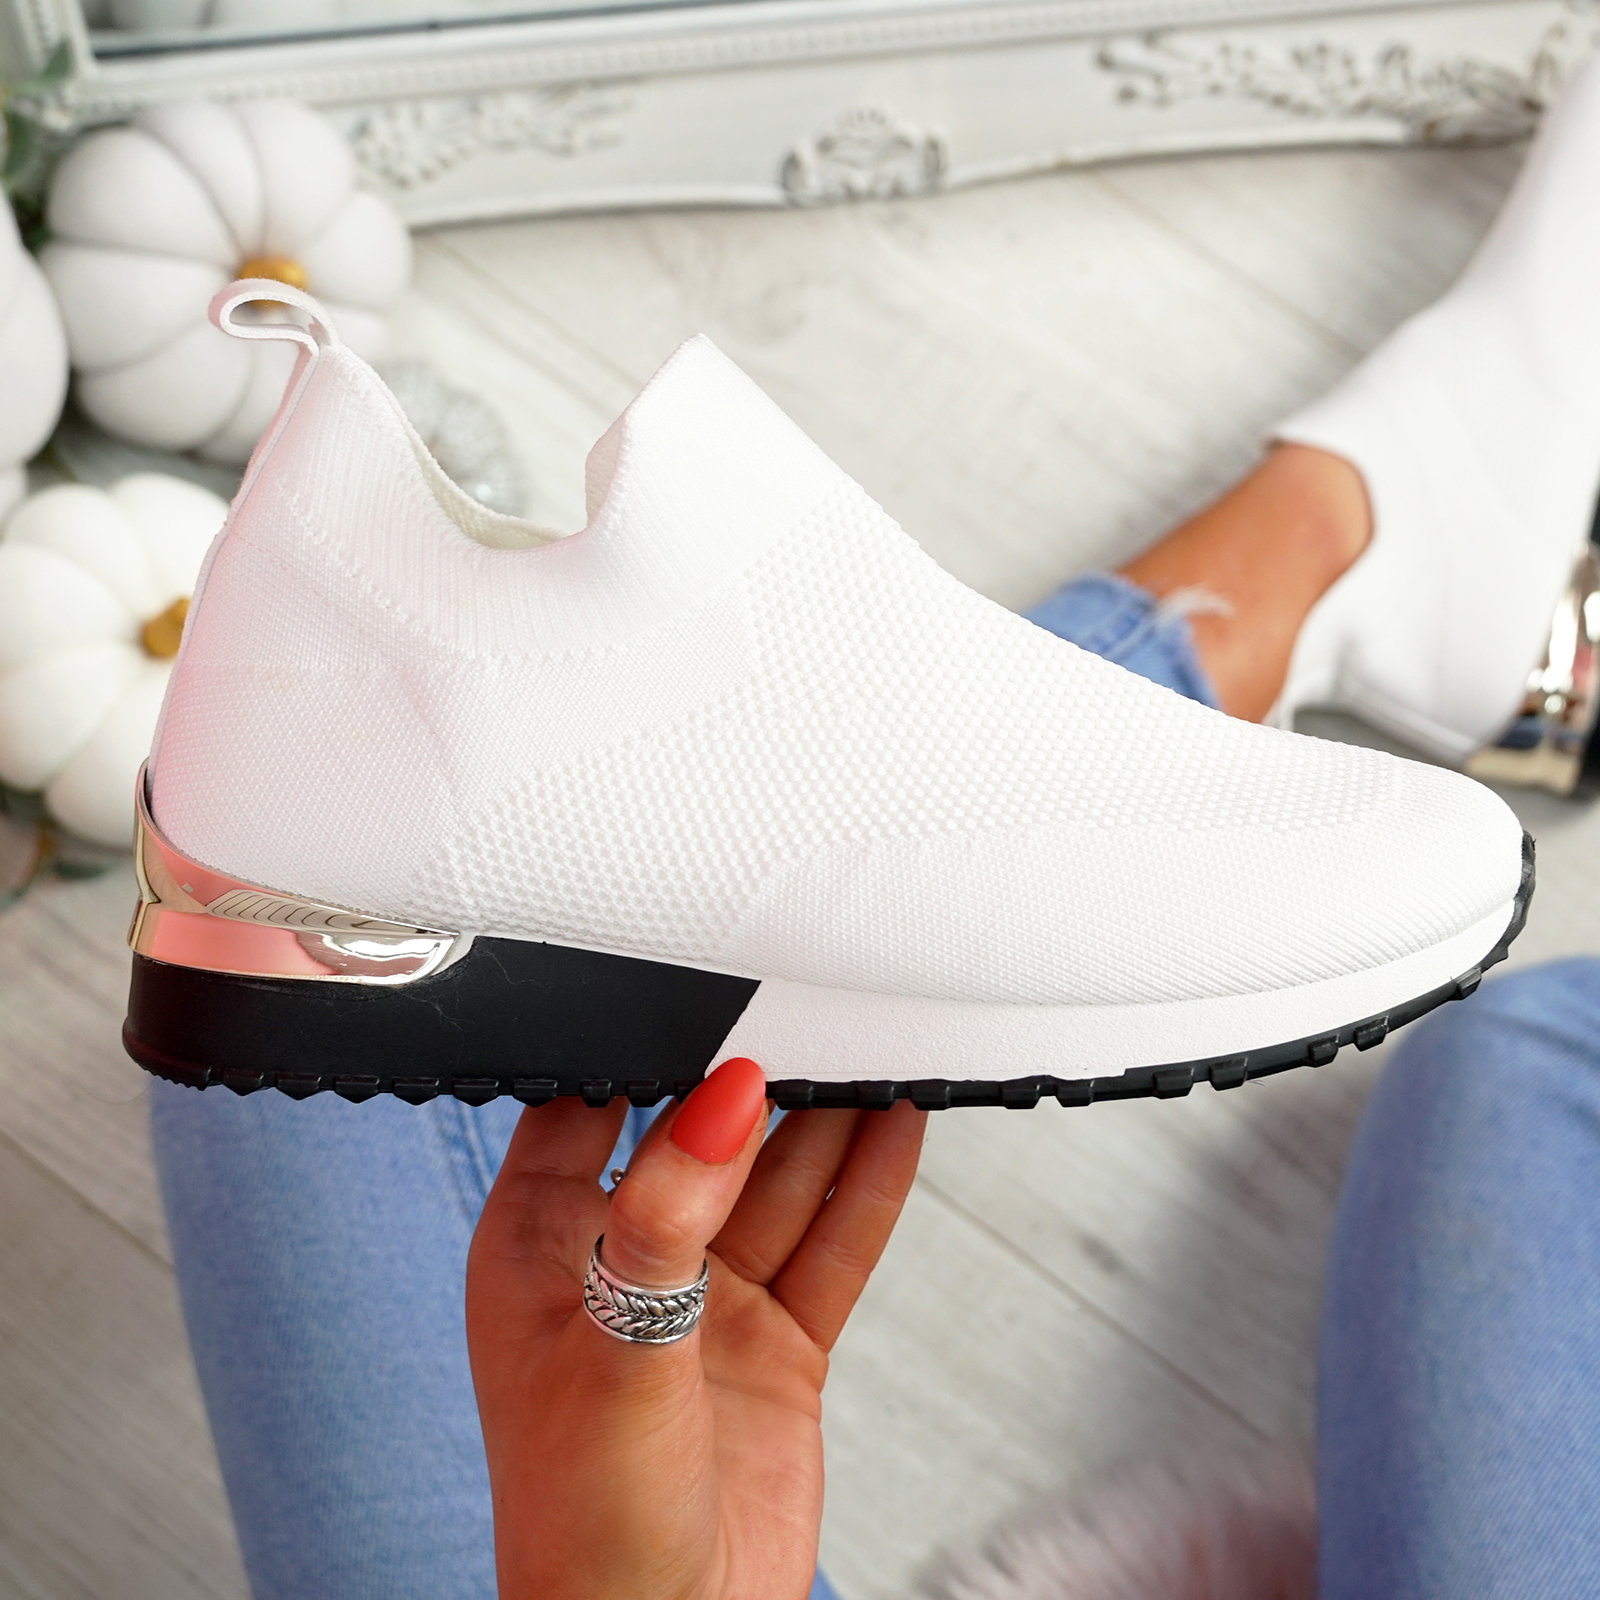 WOMENS LADIES SPORT SLIP ON TRAINERS KNIT SNEAKERS PULL ON WOMEN SHOES ...